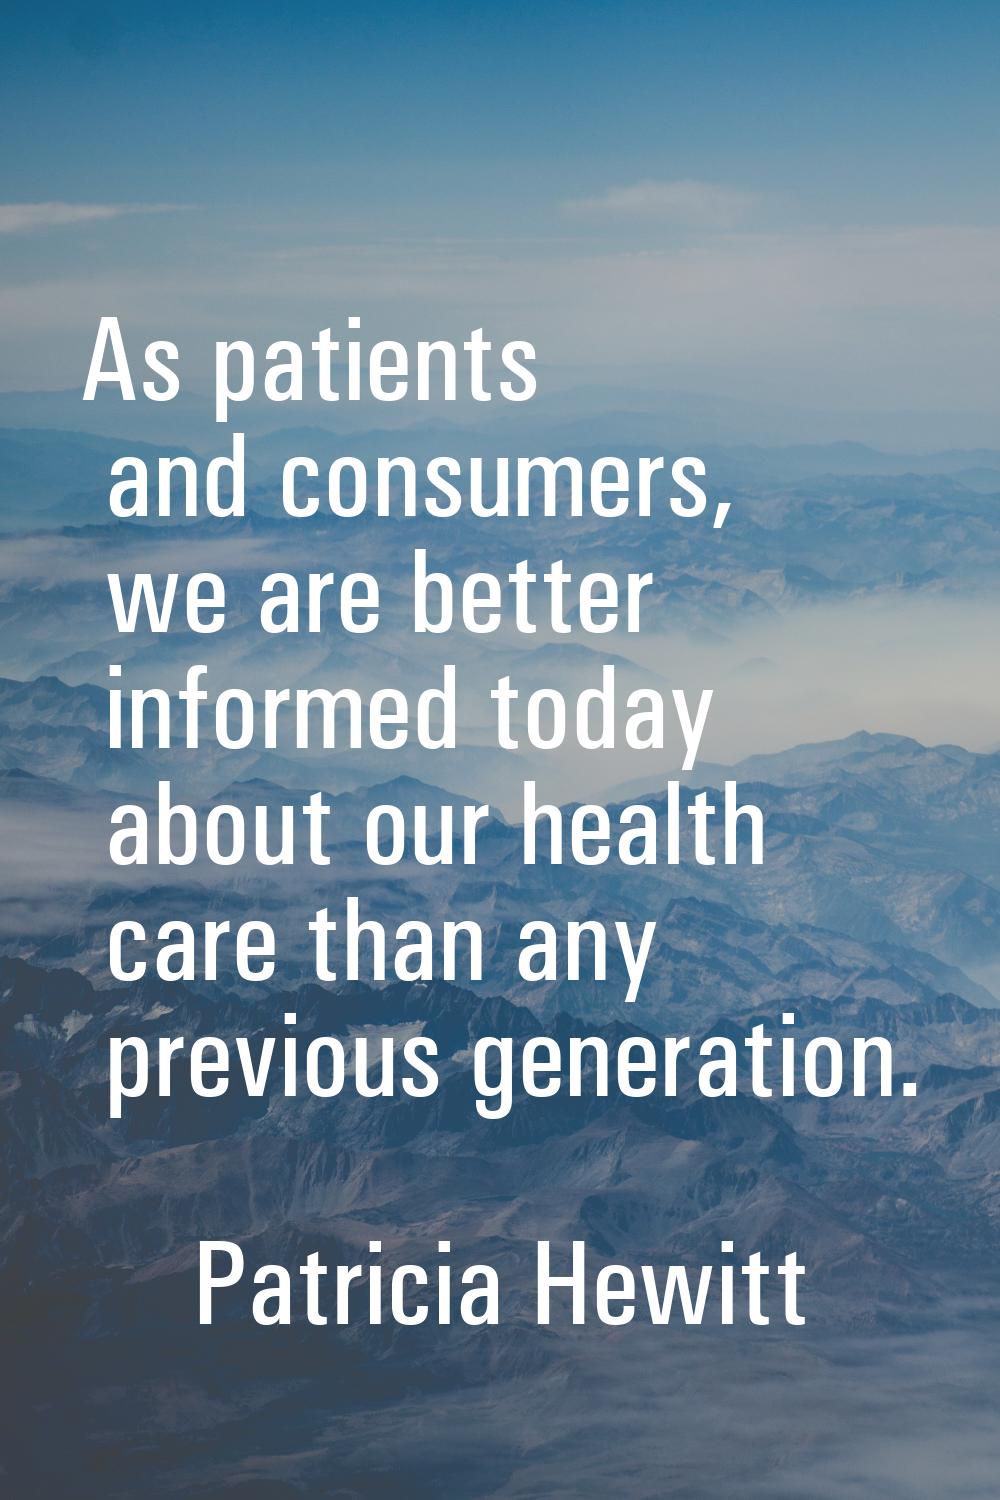 As patients and consumers, we are better informed today about our health care than any previous gen